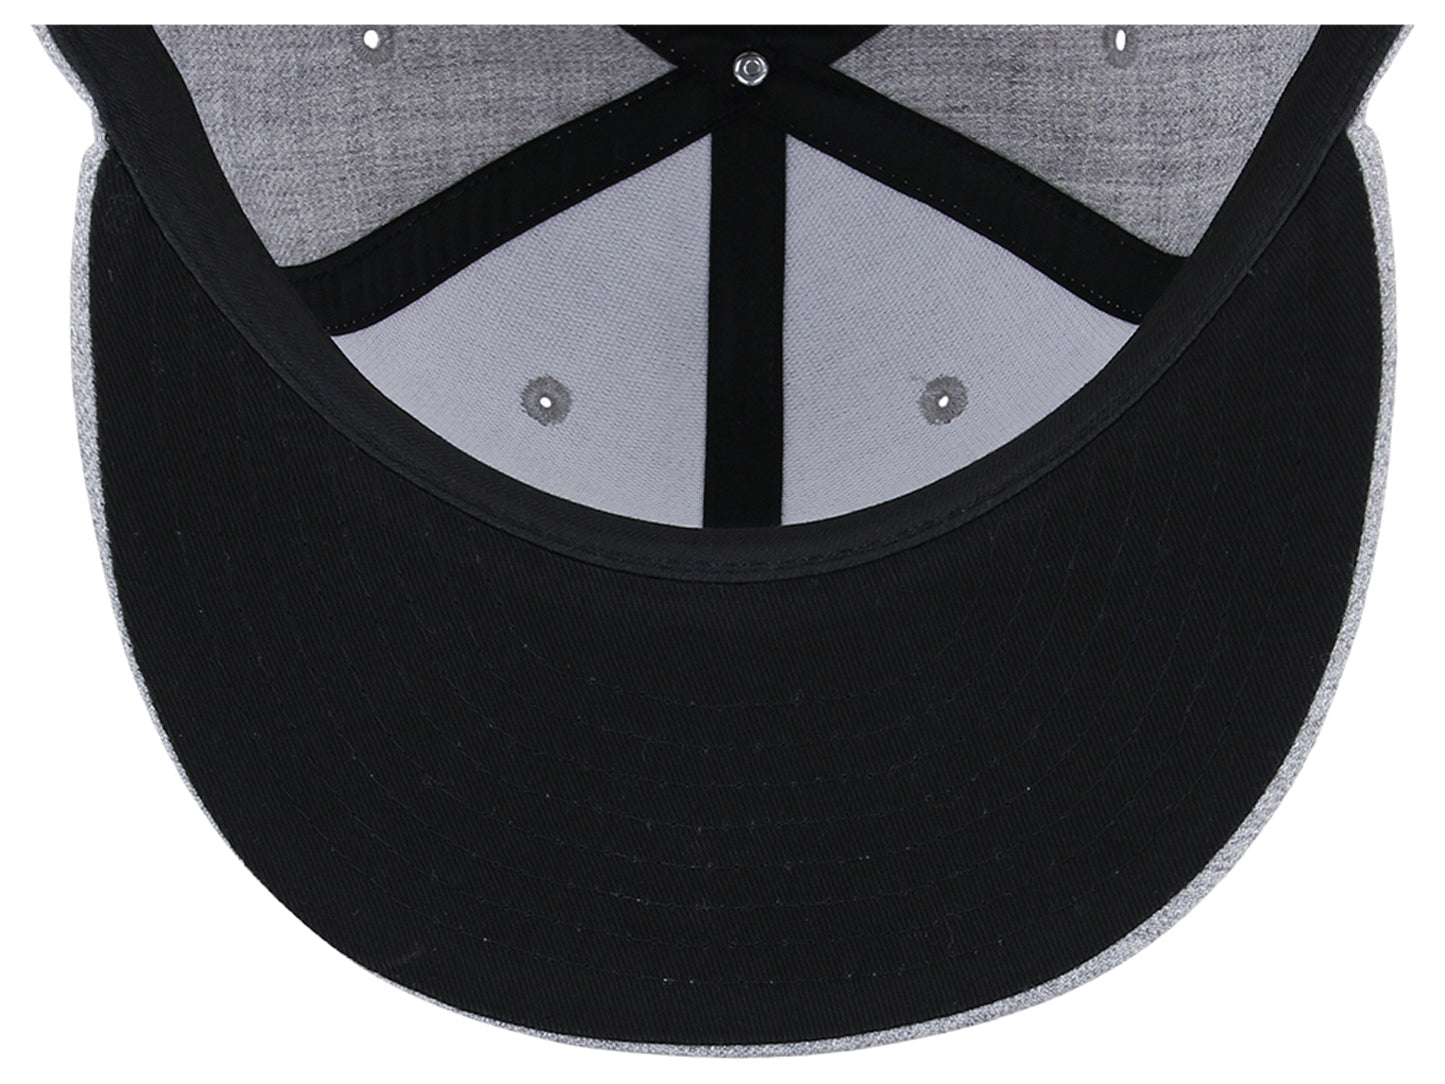 Crowns By Lids Full Court Fitted Cap - Heather Grey